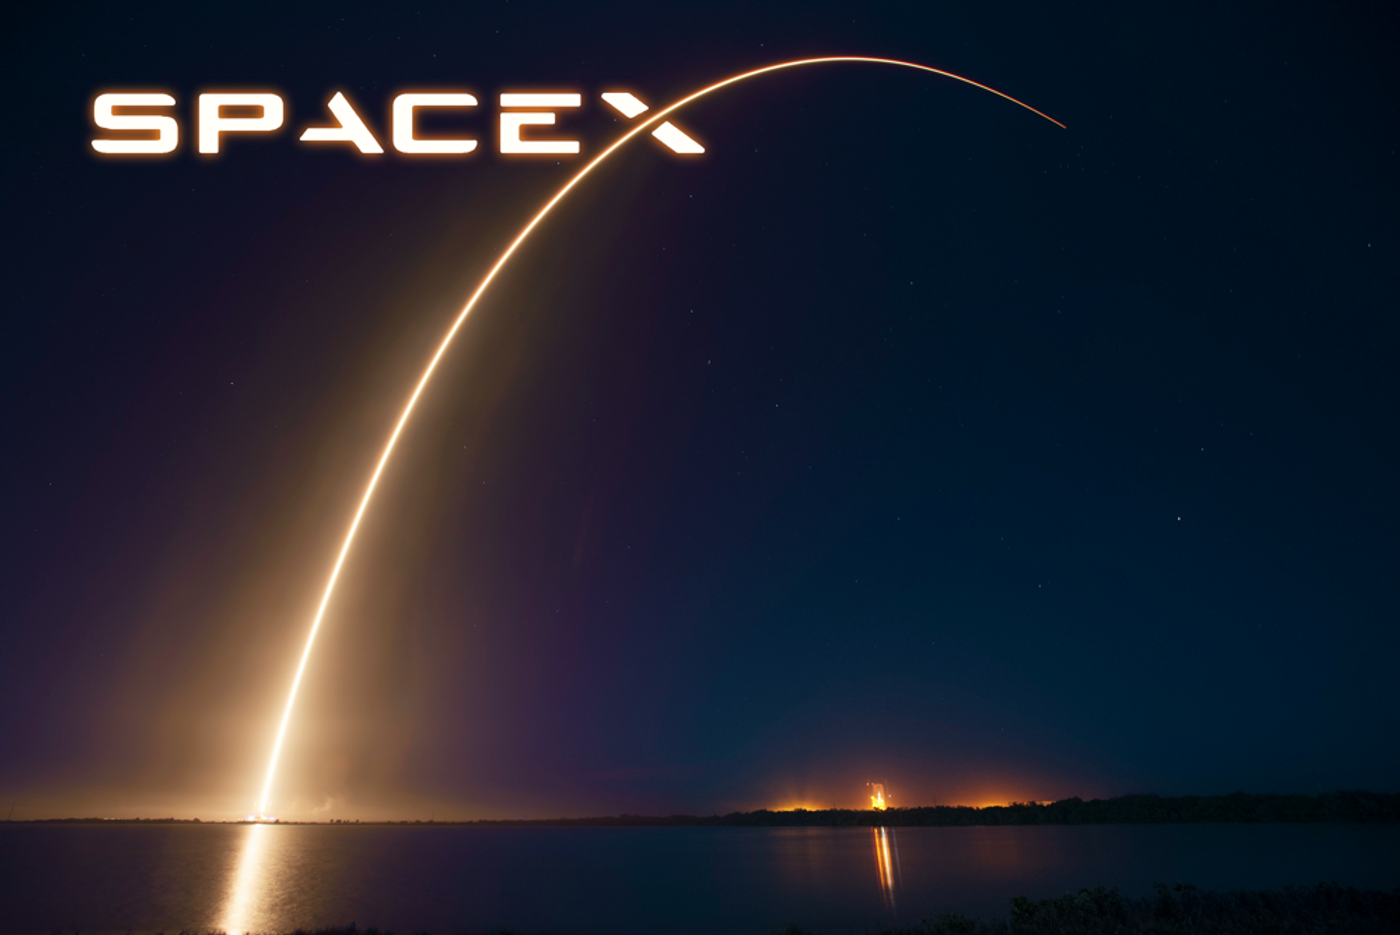 SpaceX just launched an "expendable" rocket.